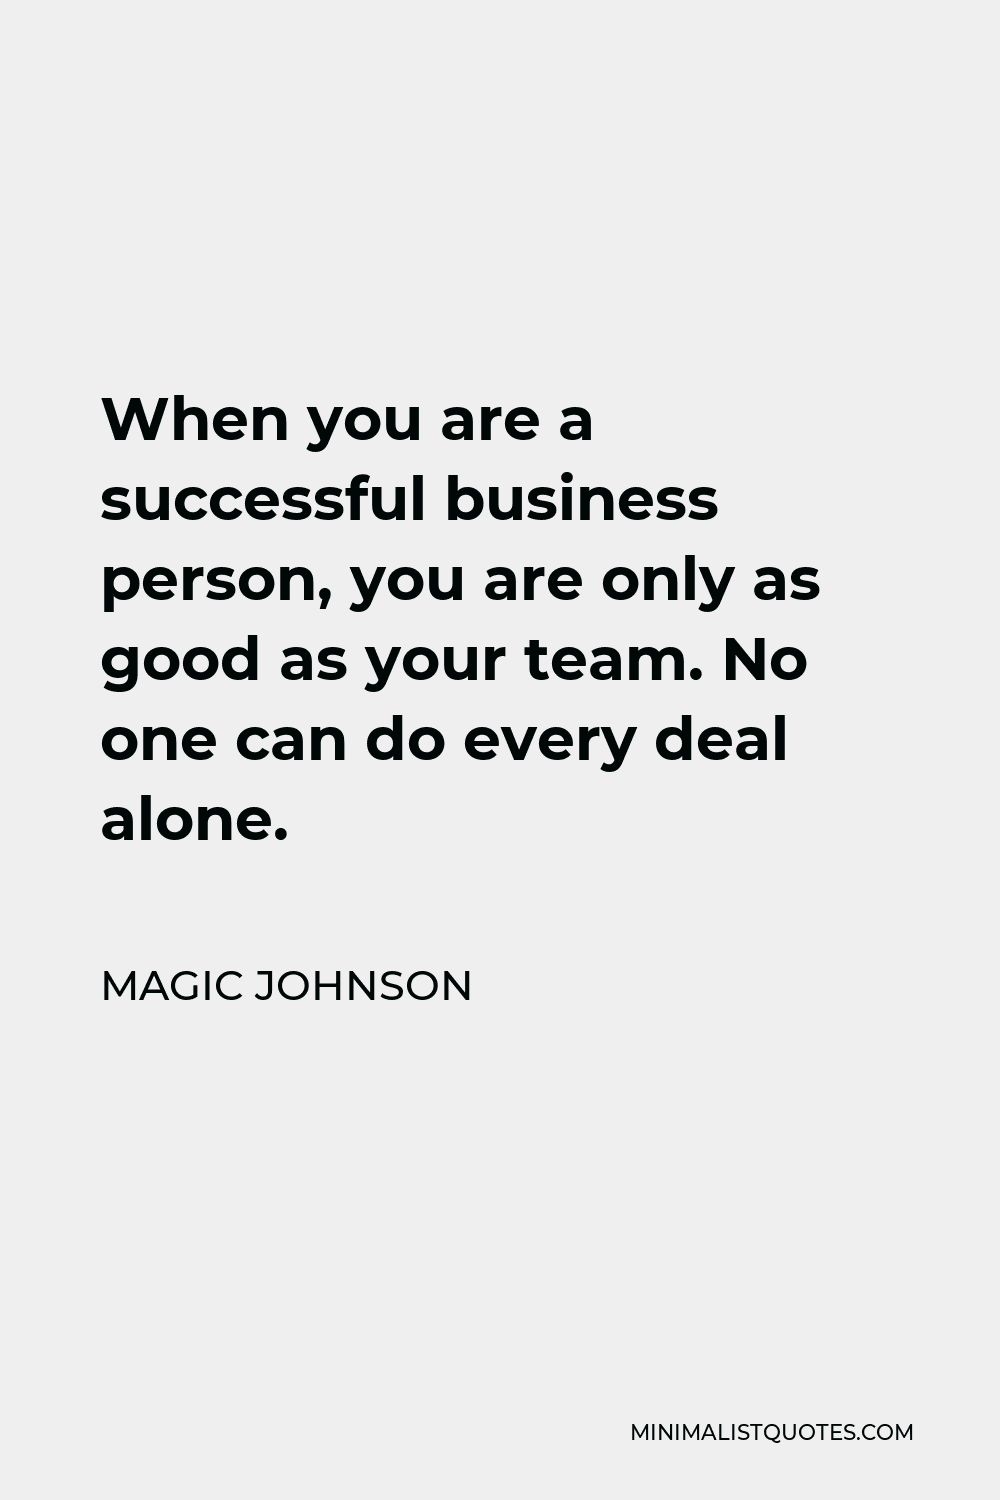 Magic Johnson Quote - When you are a successful business person, you are only as good as your team. No one can do every deal alone.